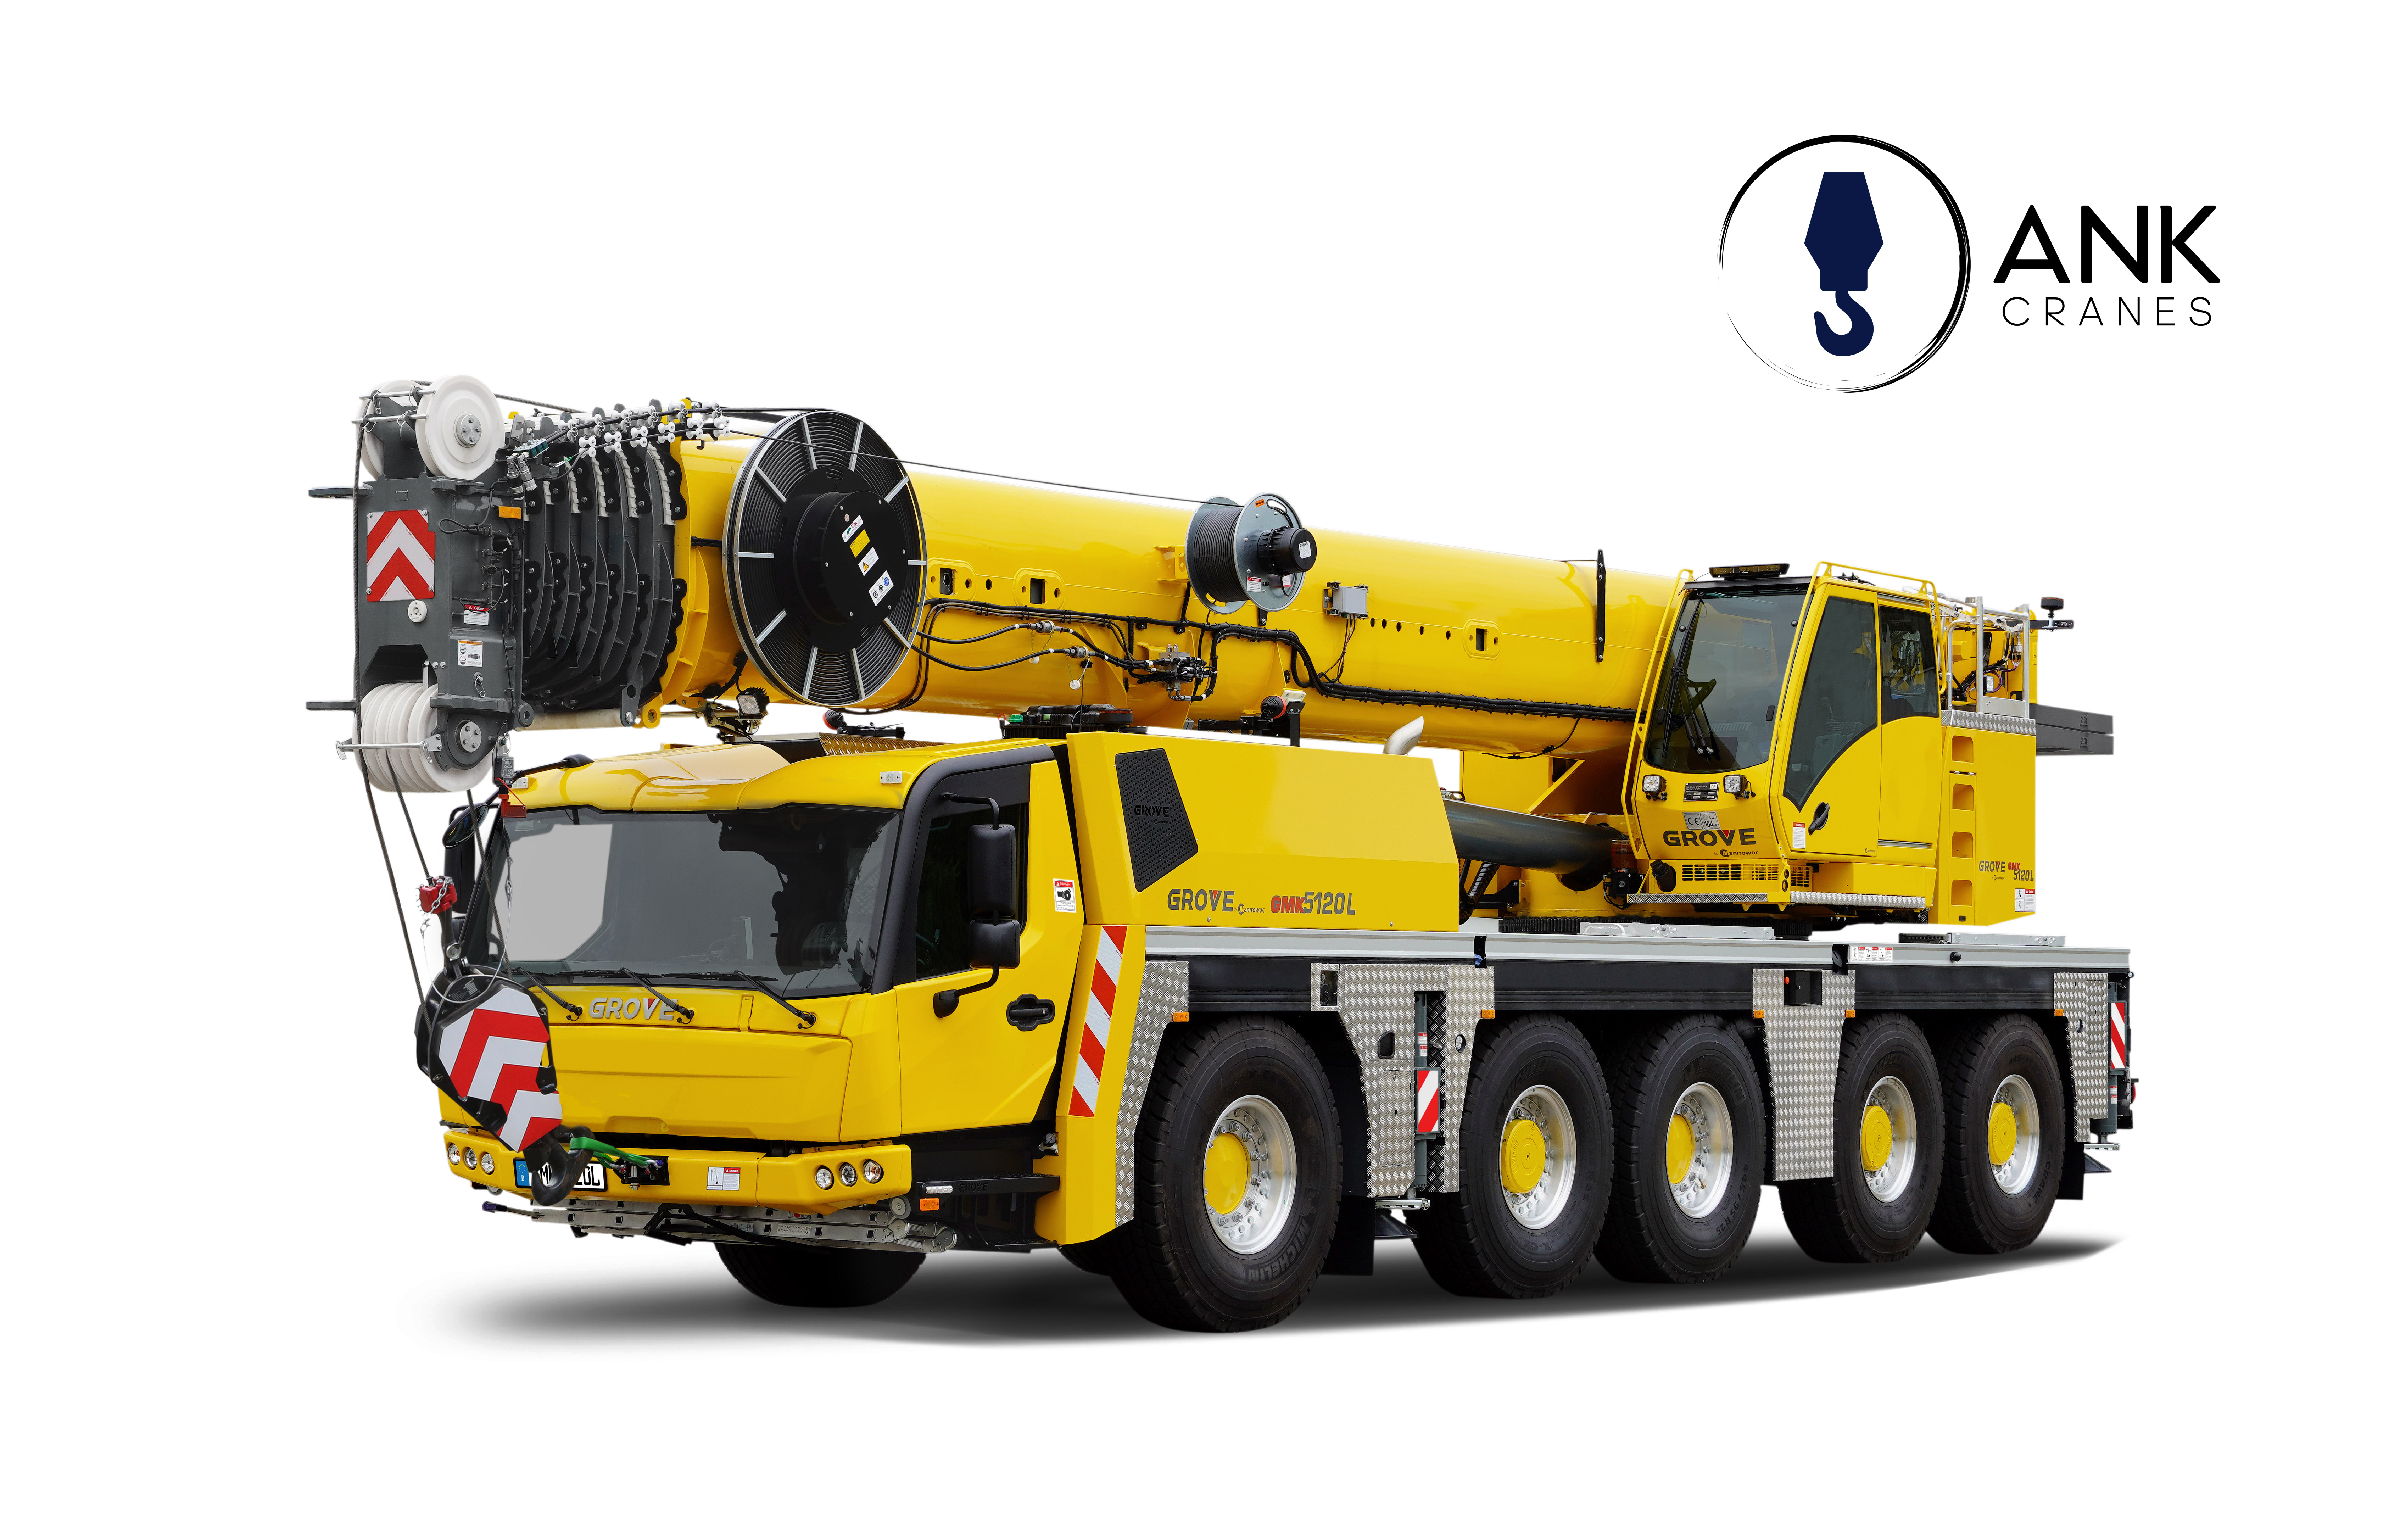 Manitowoc-appoints-ANK-Cranes-as-new-Grove-dealer-and-service-supplier-in-Norway-and-Sweden-01.jpg